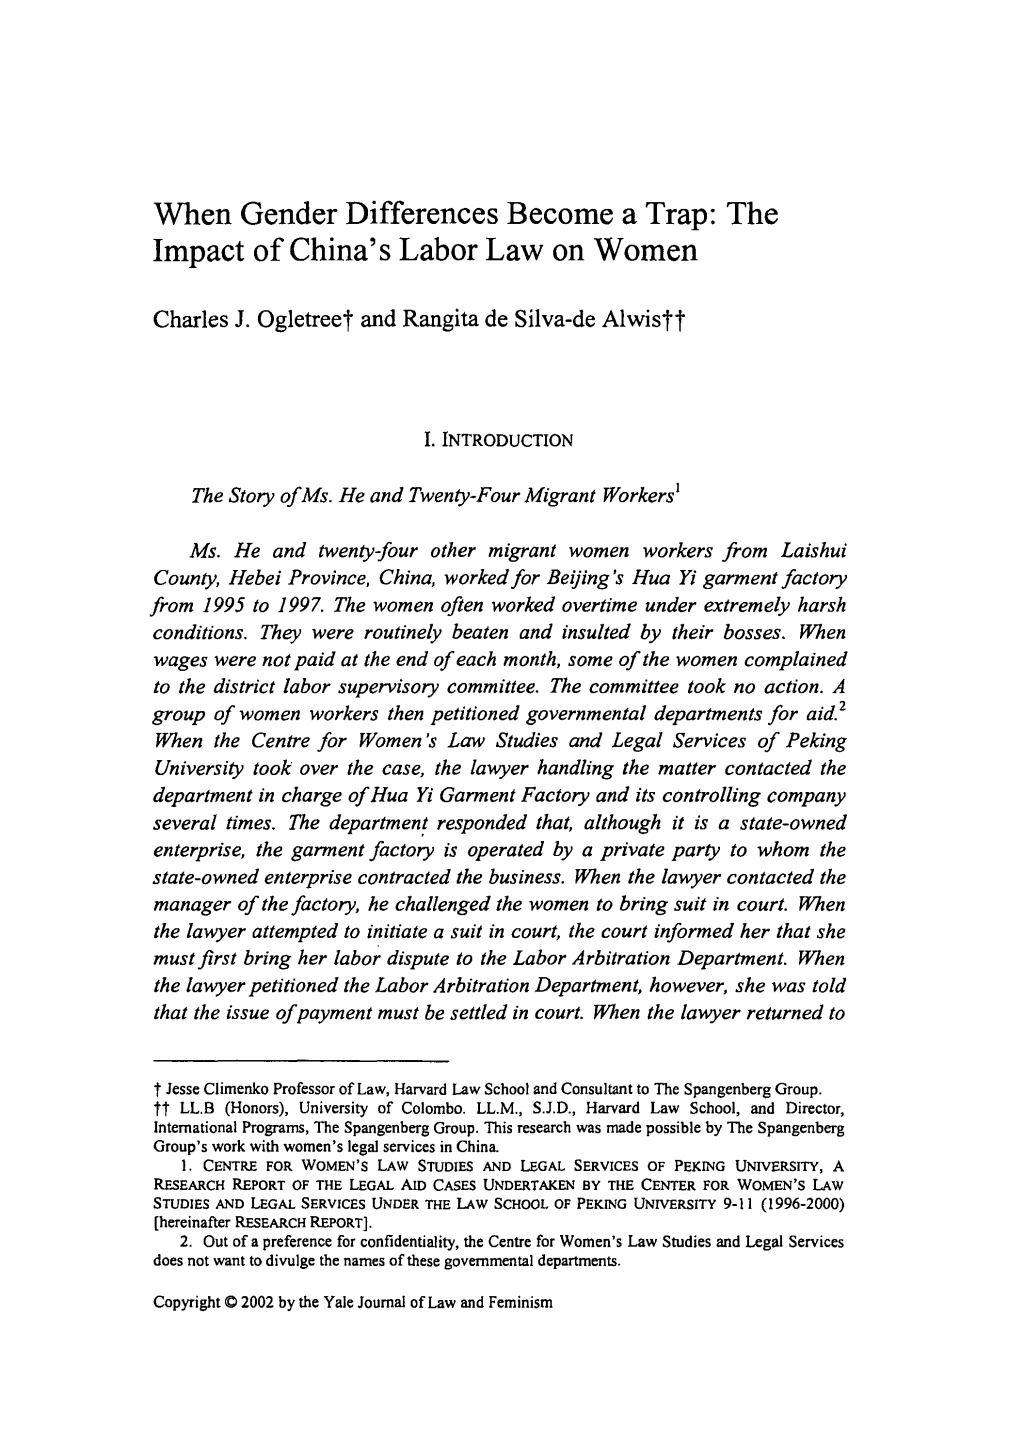 When Gender Differences Become a Trap: the Impact of China's Labor Law on Women